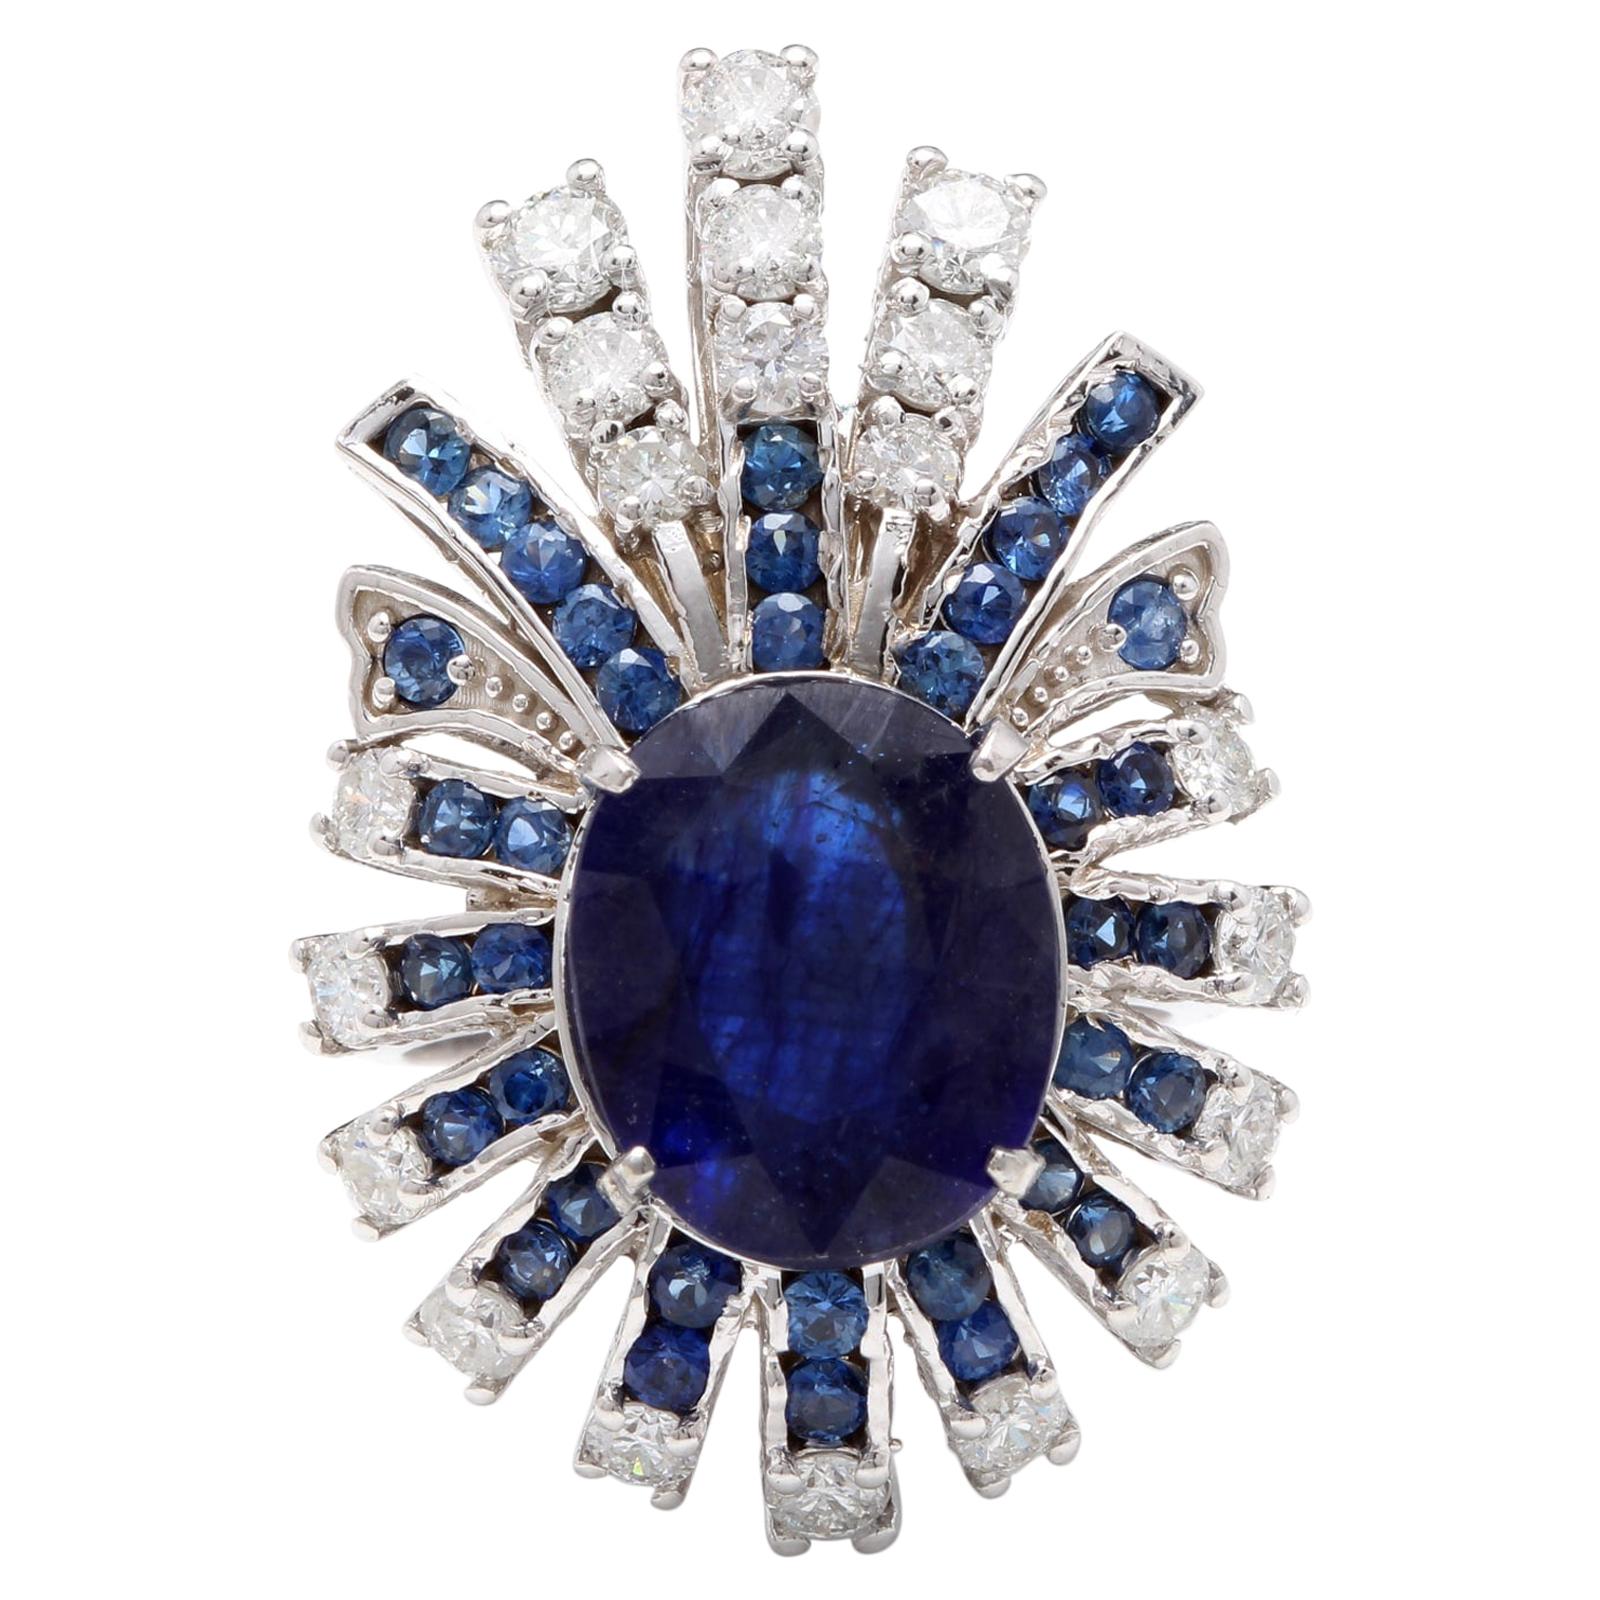 10.25 Carat Exquisite Natural Blue Sapphire and Diamond 14K Solid White Gold For Sale